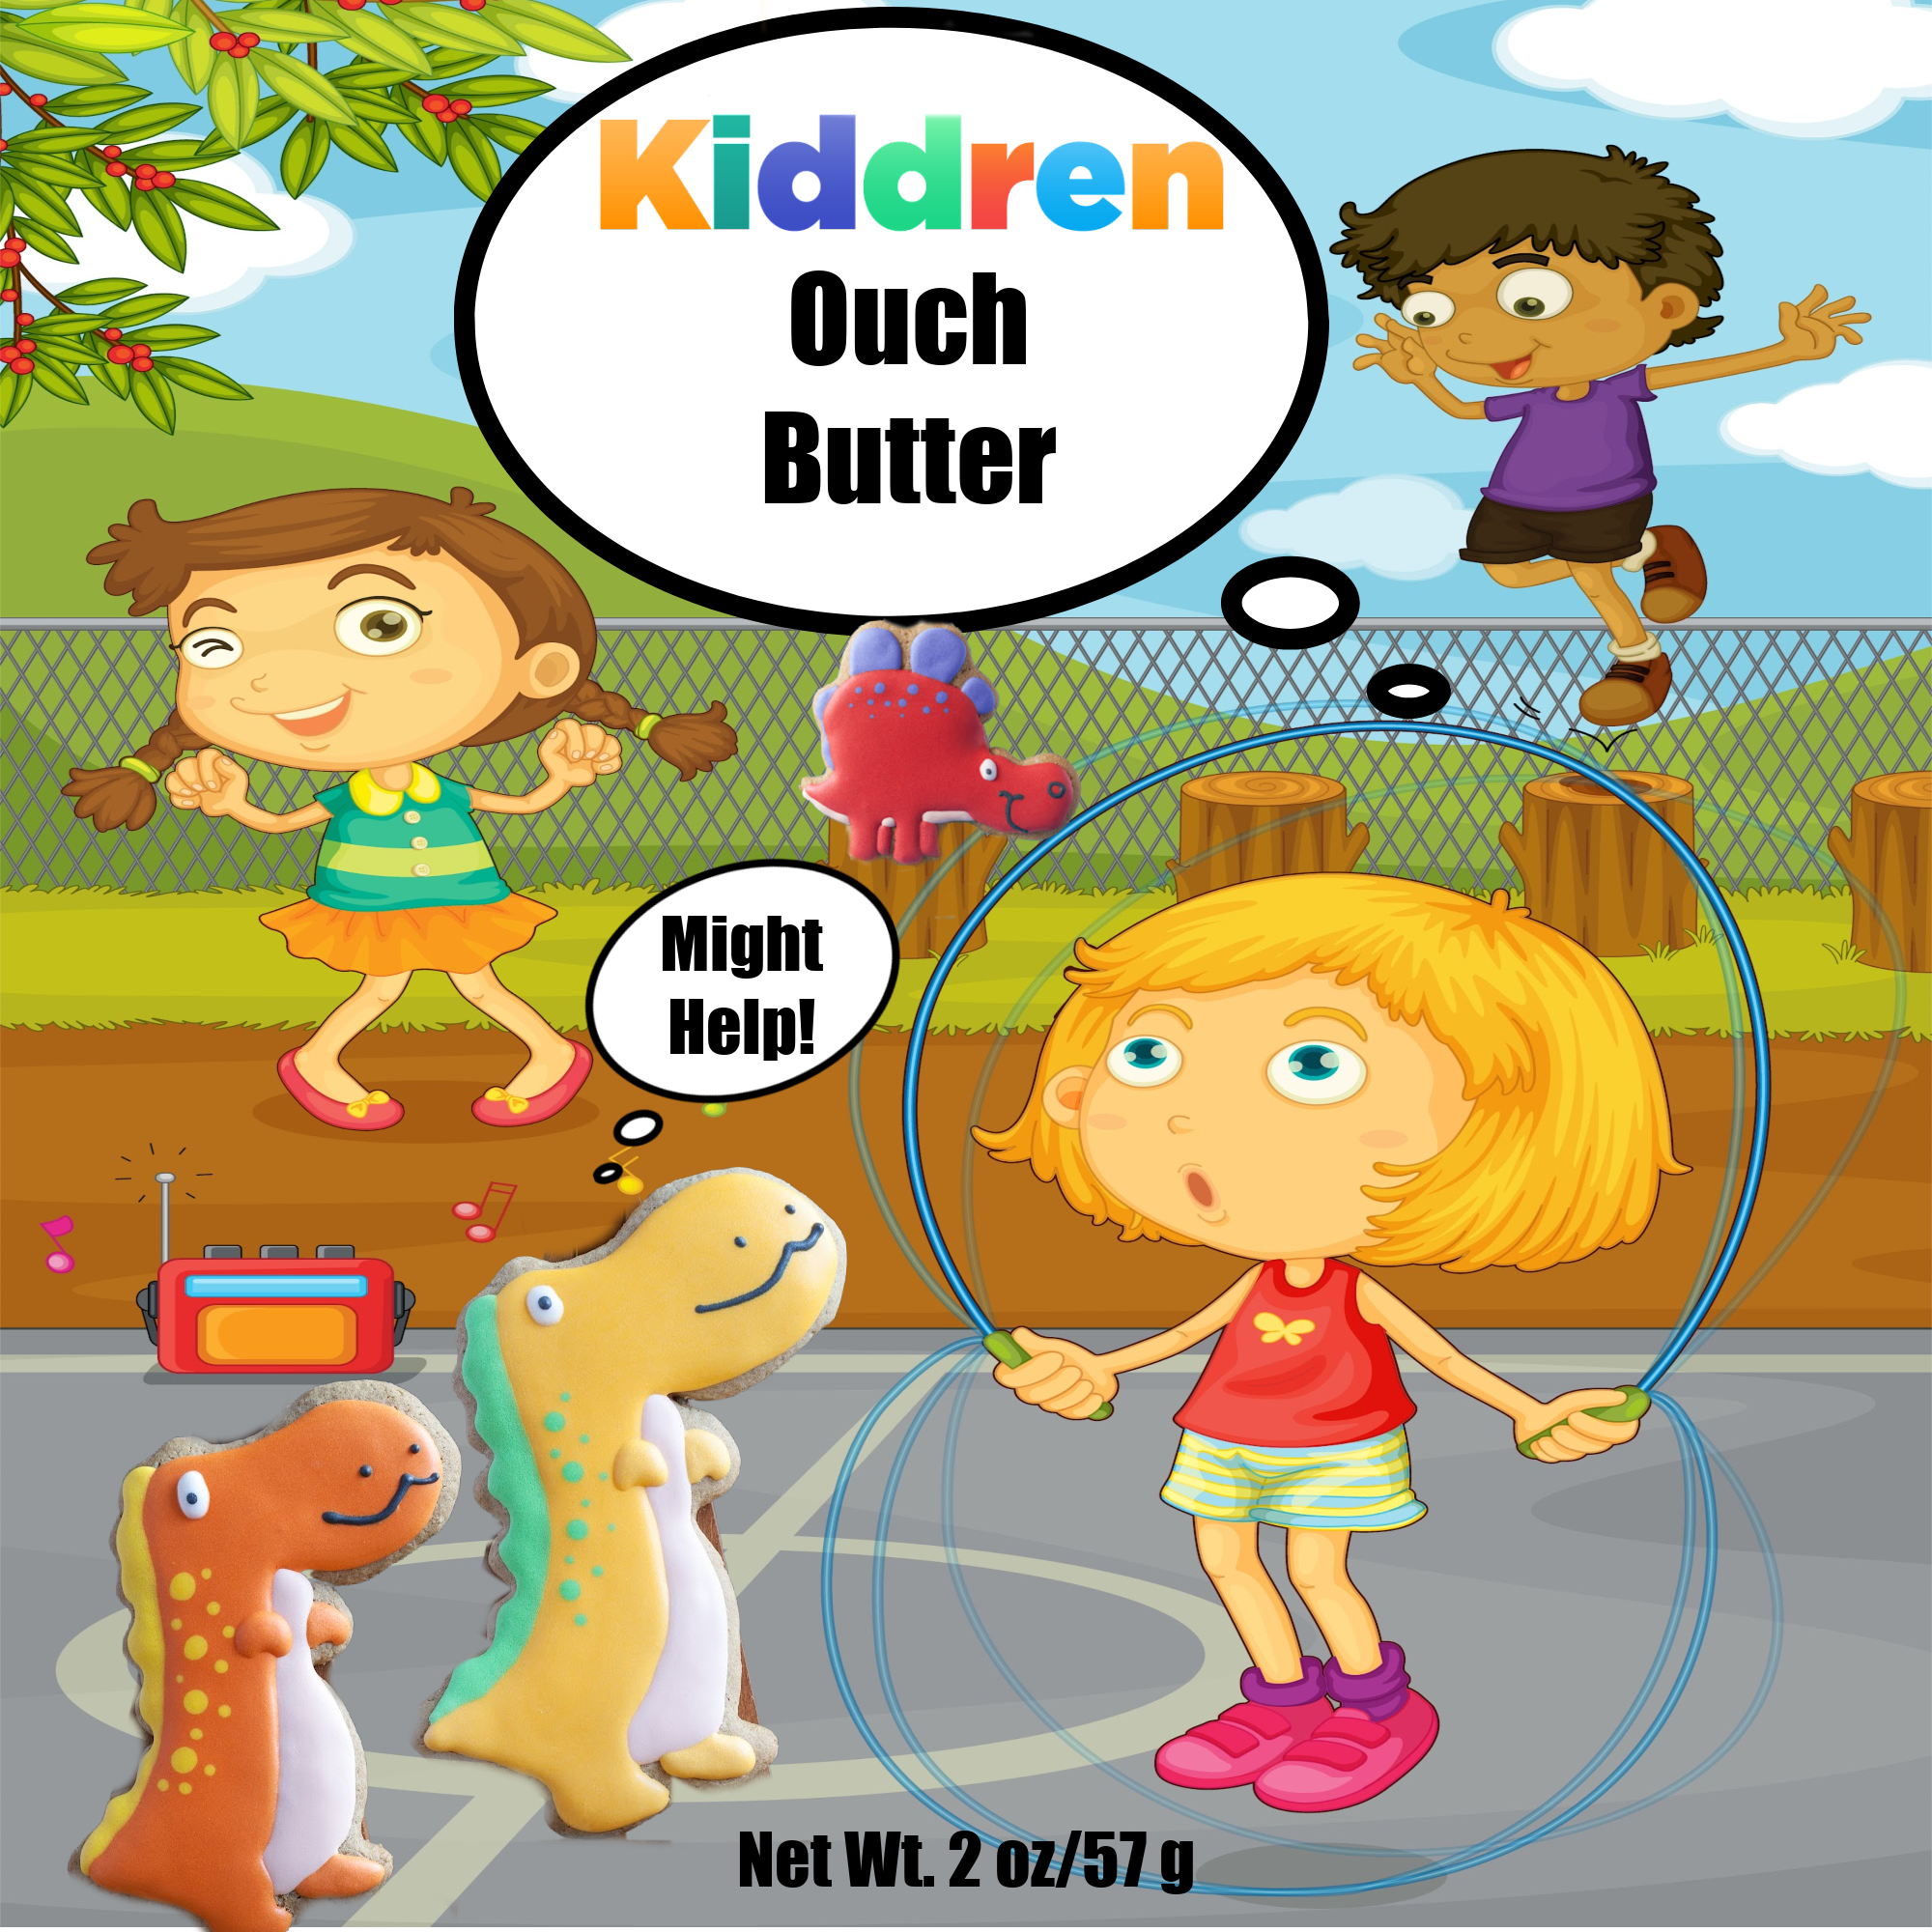 Kiddren Ouch Butter 2 ounce for kids is great to apply as soon as kids get a minor bump or ouch to prevent or lessen bruising or  bumps